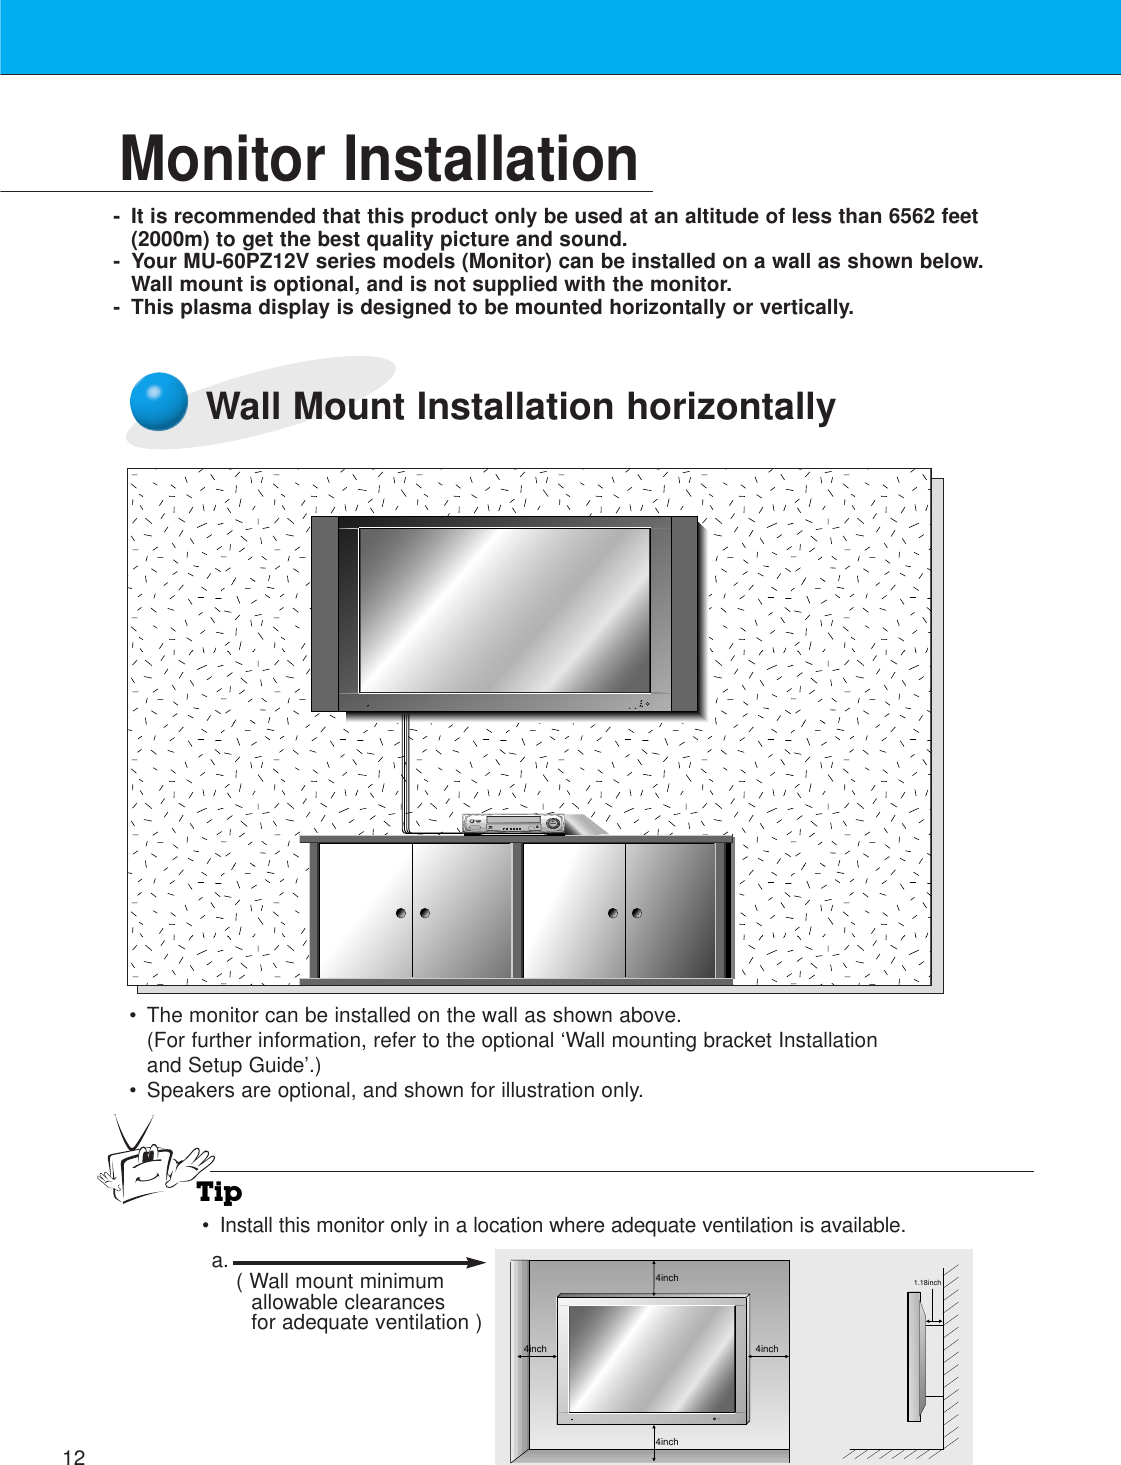 12Monitor Installation- It is recommended that this product only be used at an altitude of less than 6562 feet(2000m) to get the best quality picture and sound.- Your MU-60PZ12V series models (Monitor) can be installed on a wall as shown below.Wall mount is optional, and is not supplied with the monitor.- This plasma display is designed to be mounted horizontally or vertically.Wall Mount Installation horizontally•The monitor can be installed on the wall as shown above.(For further information, refer to the optional ‘Wall mounting bracket Installationand Setup Guide’.)• Speakers are optional, and shown for illustration only.Tip•Install this monitor only in a location where adequate ventilation is available.4inch4inch4inch4inch1.18incha. ( Wall mount minimumallowable clearancesfor adequate ventilation )